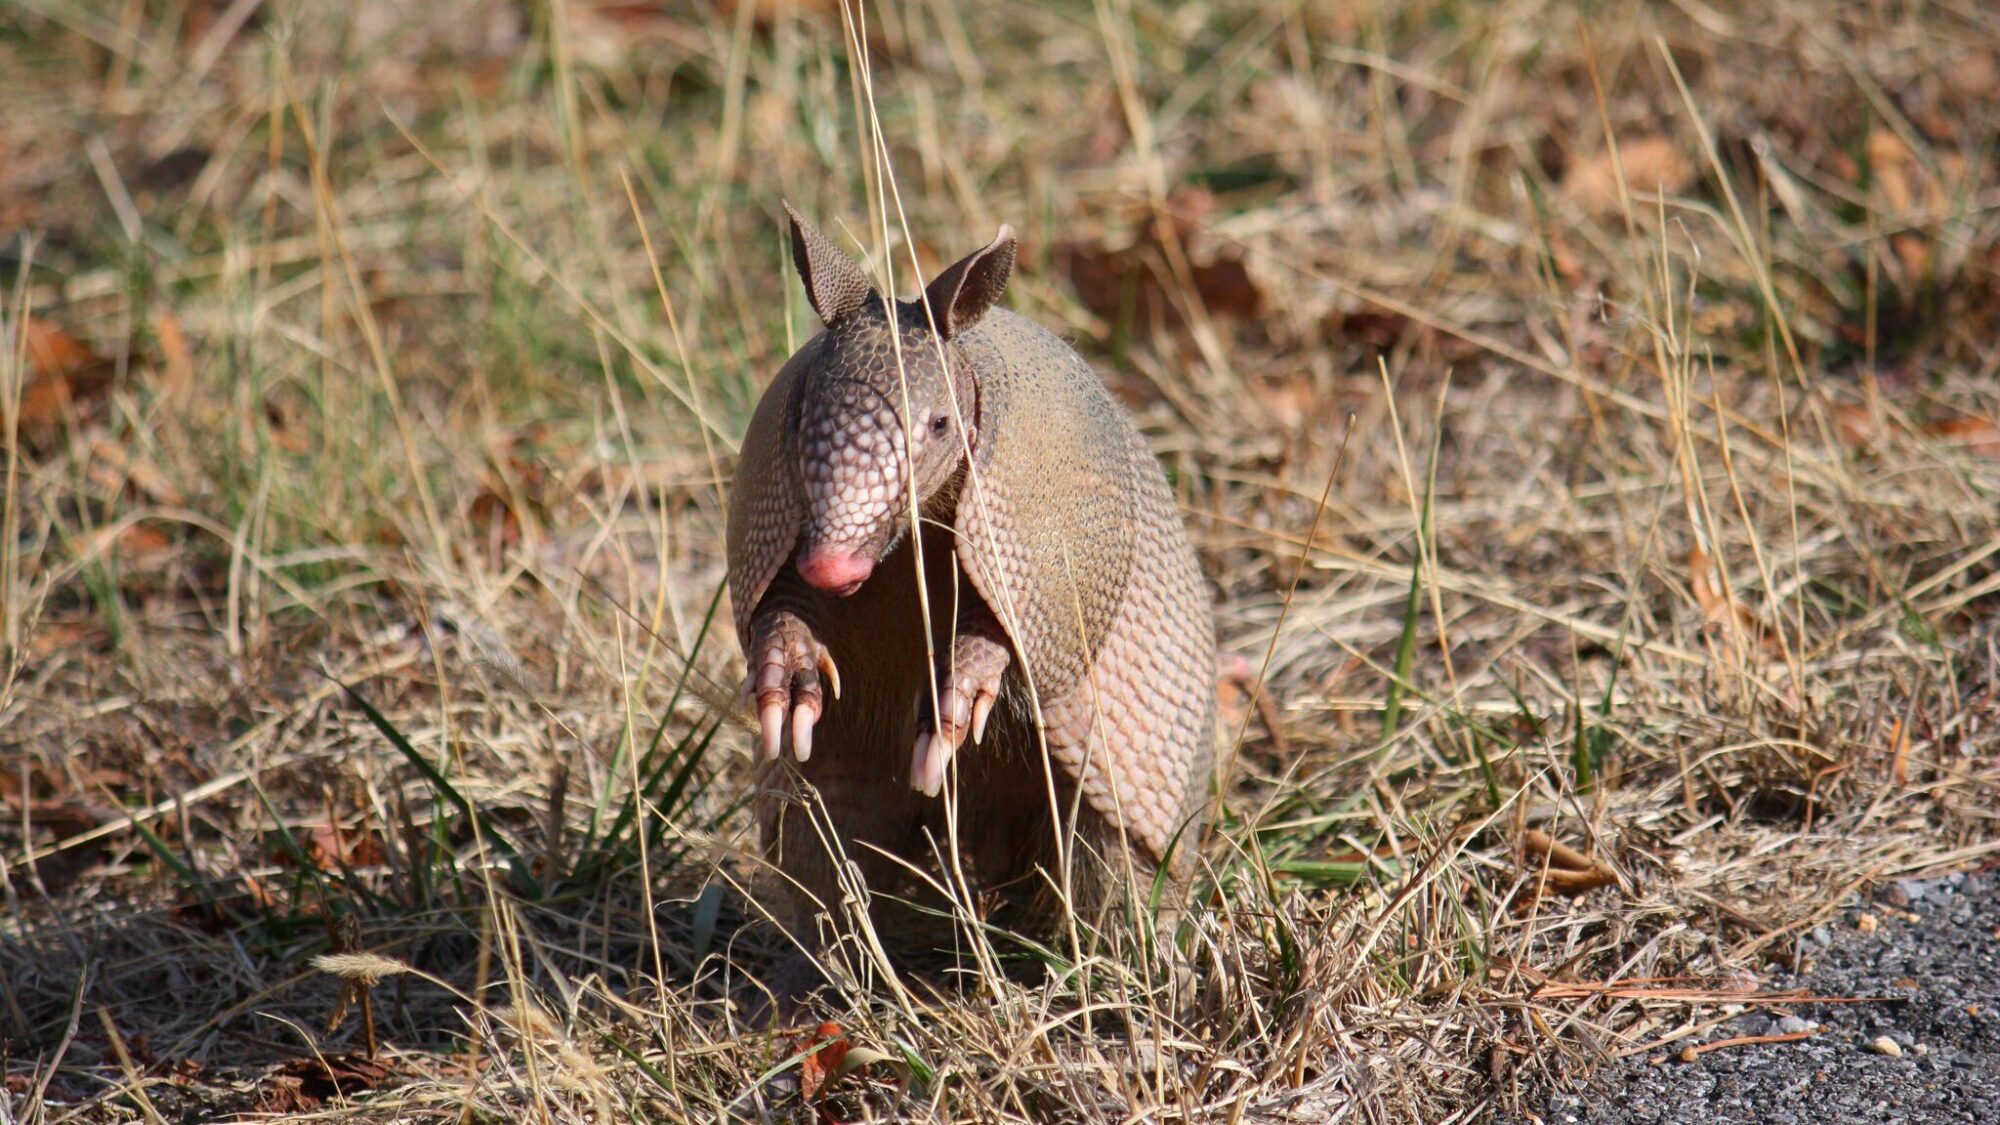 Named Armadillo. I tried all different kinds of bait in my